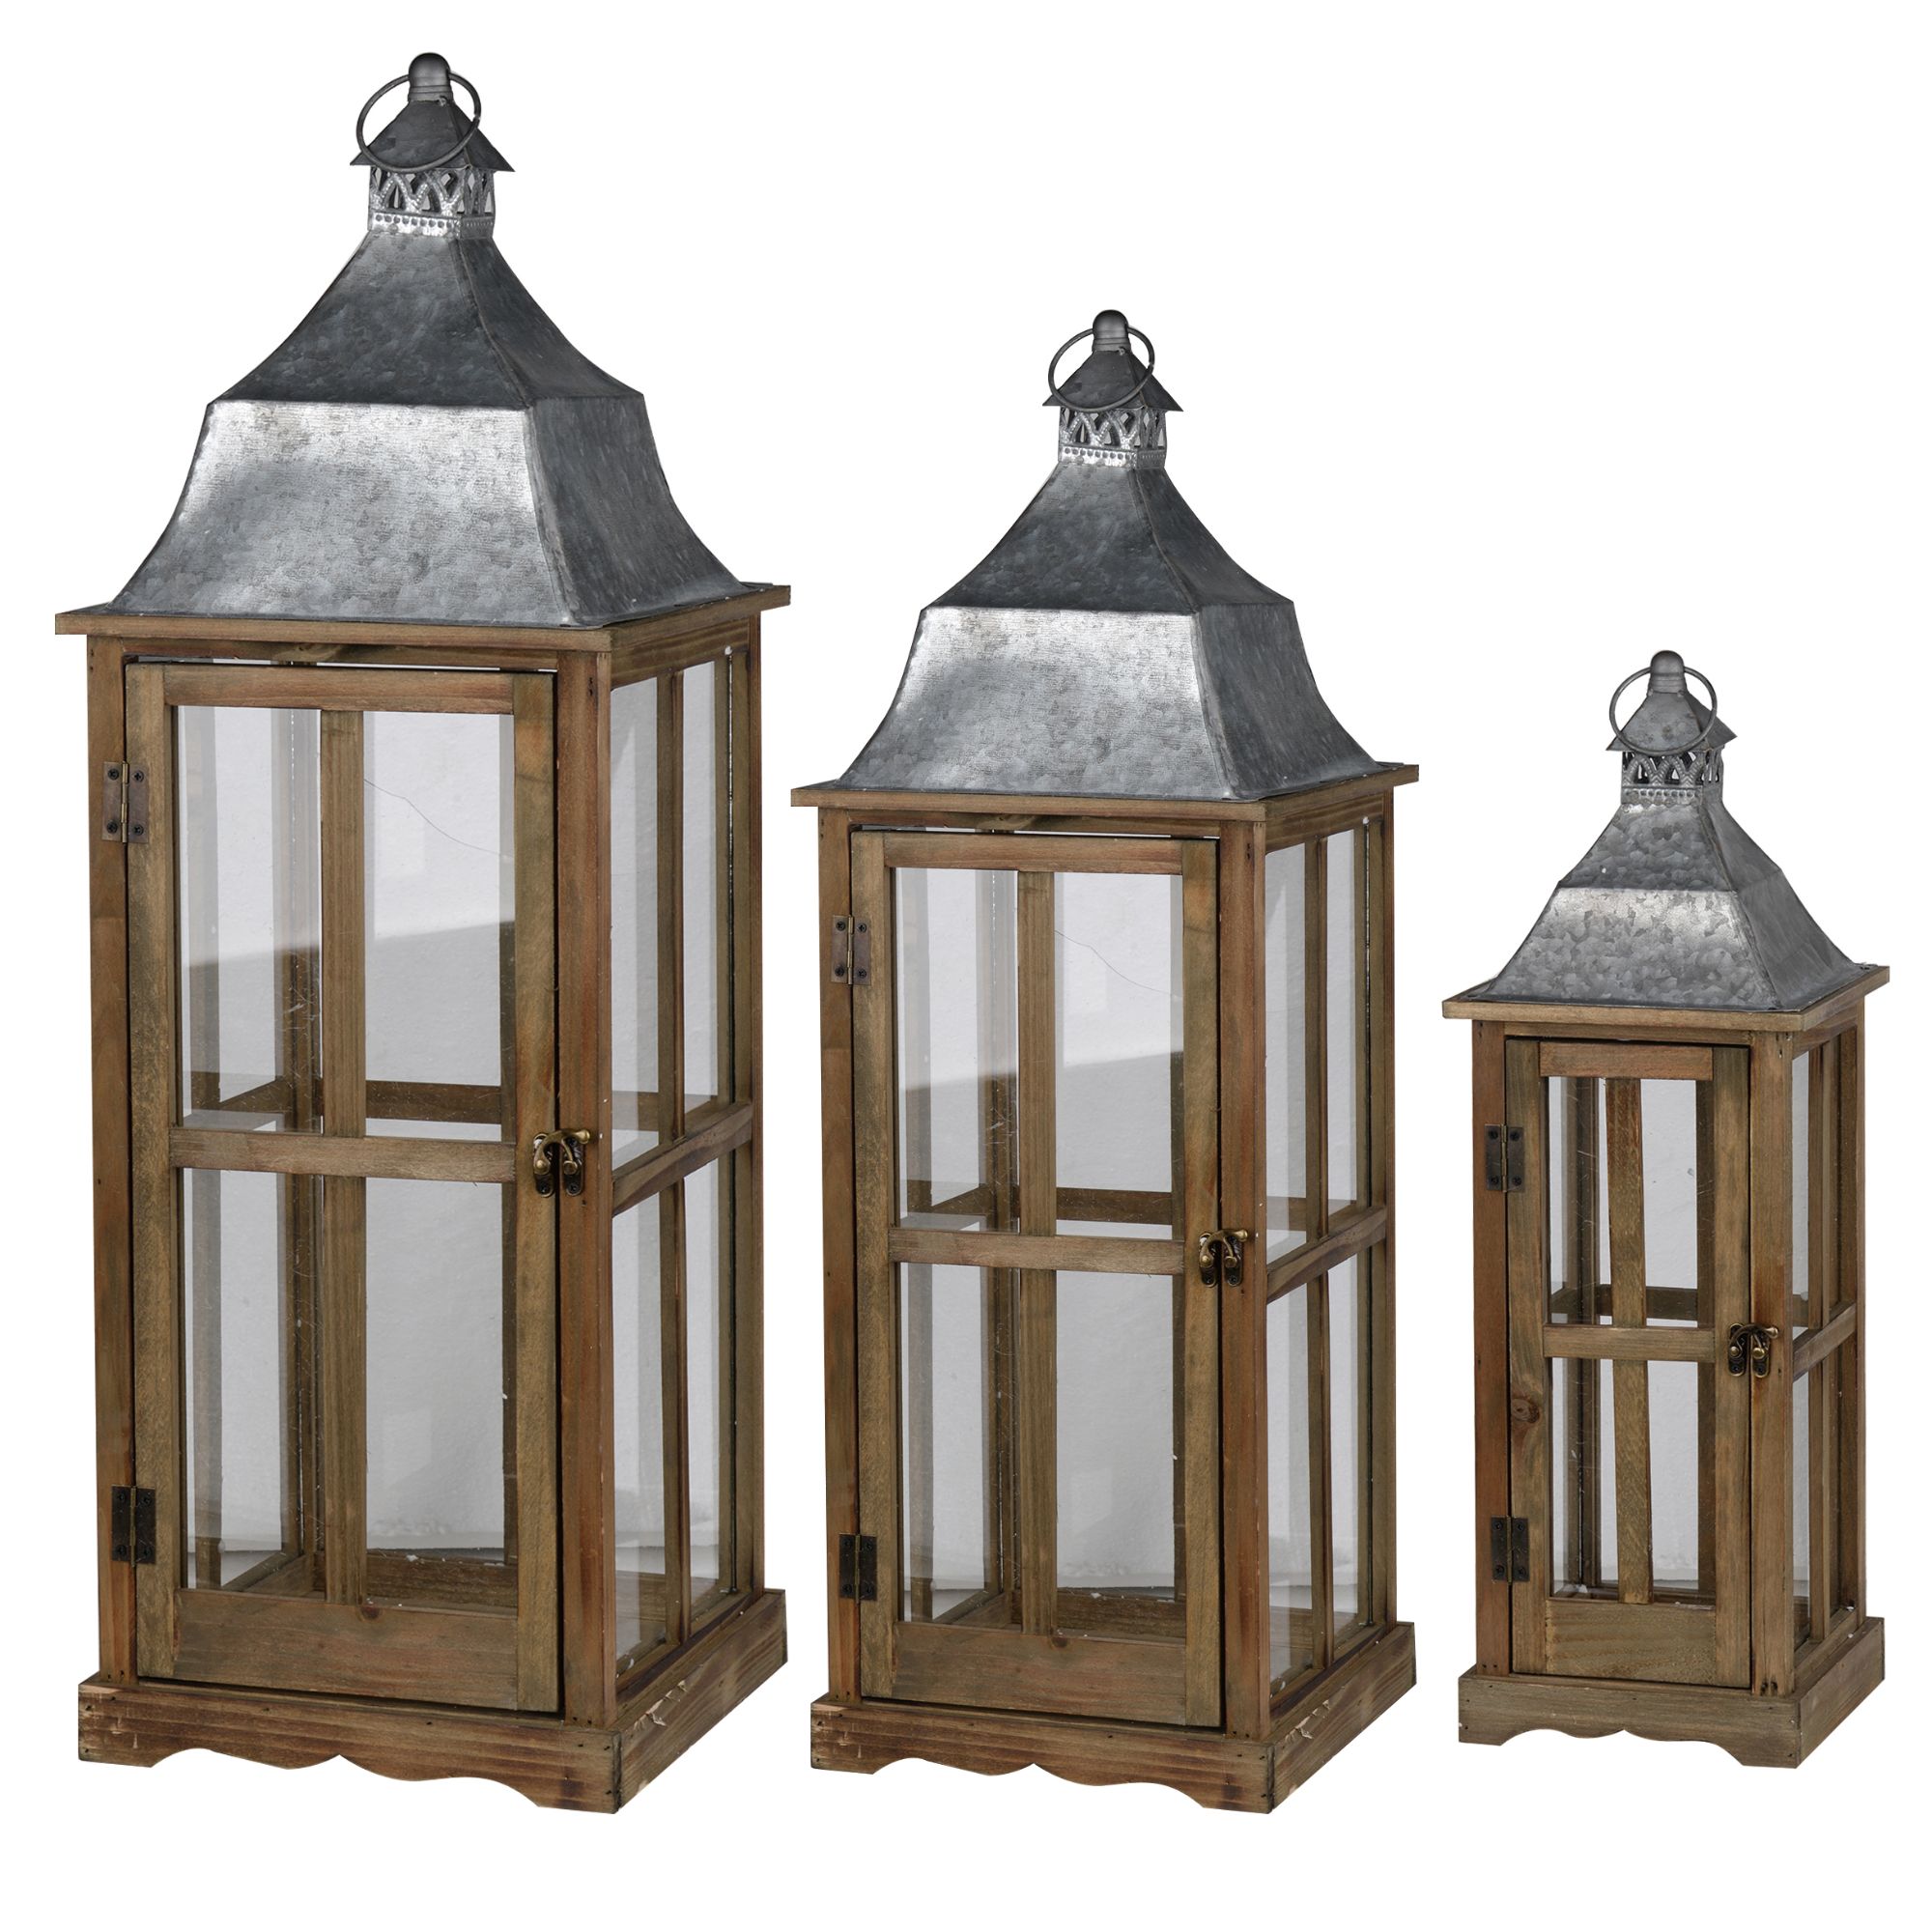 CC Home Furnishings Set of 3 Brown and Gray Classic Window Scape Lanterns 35.25"